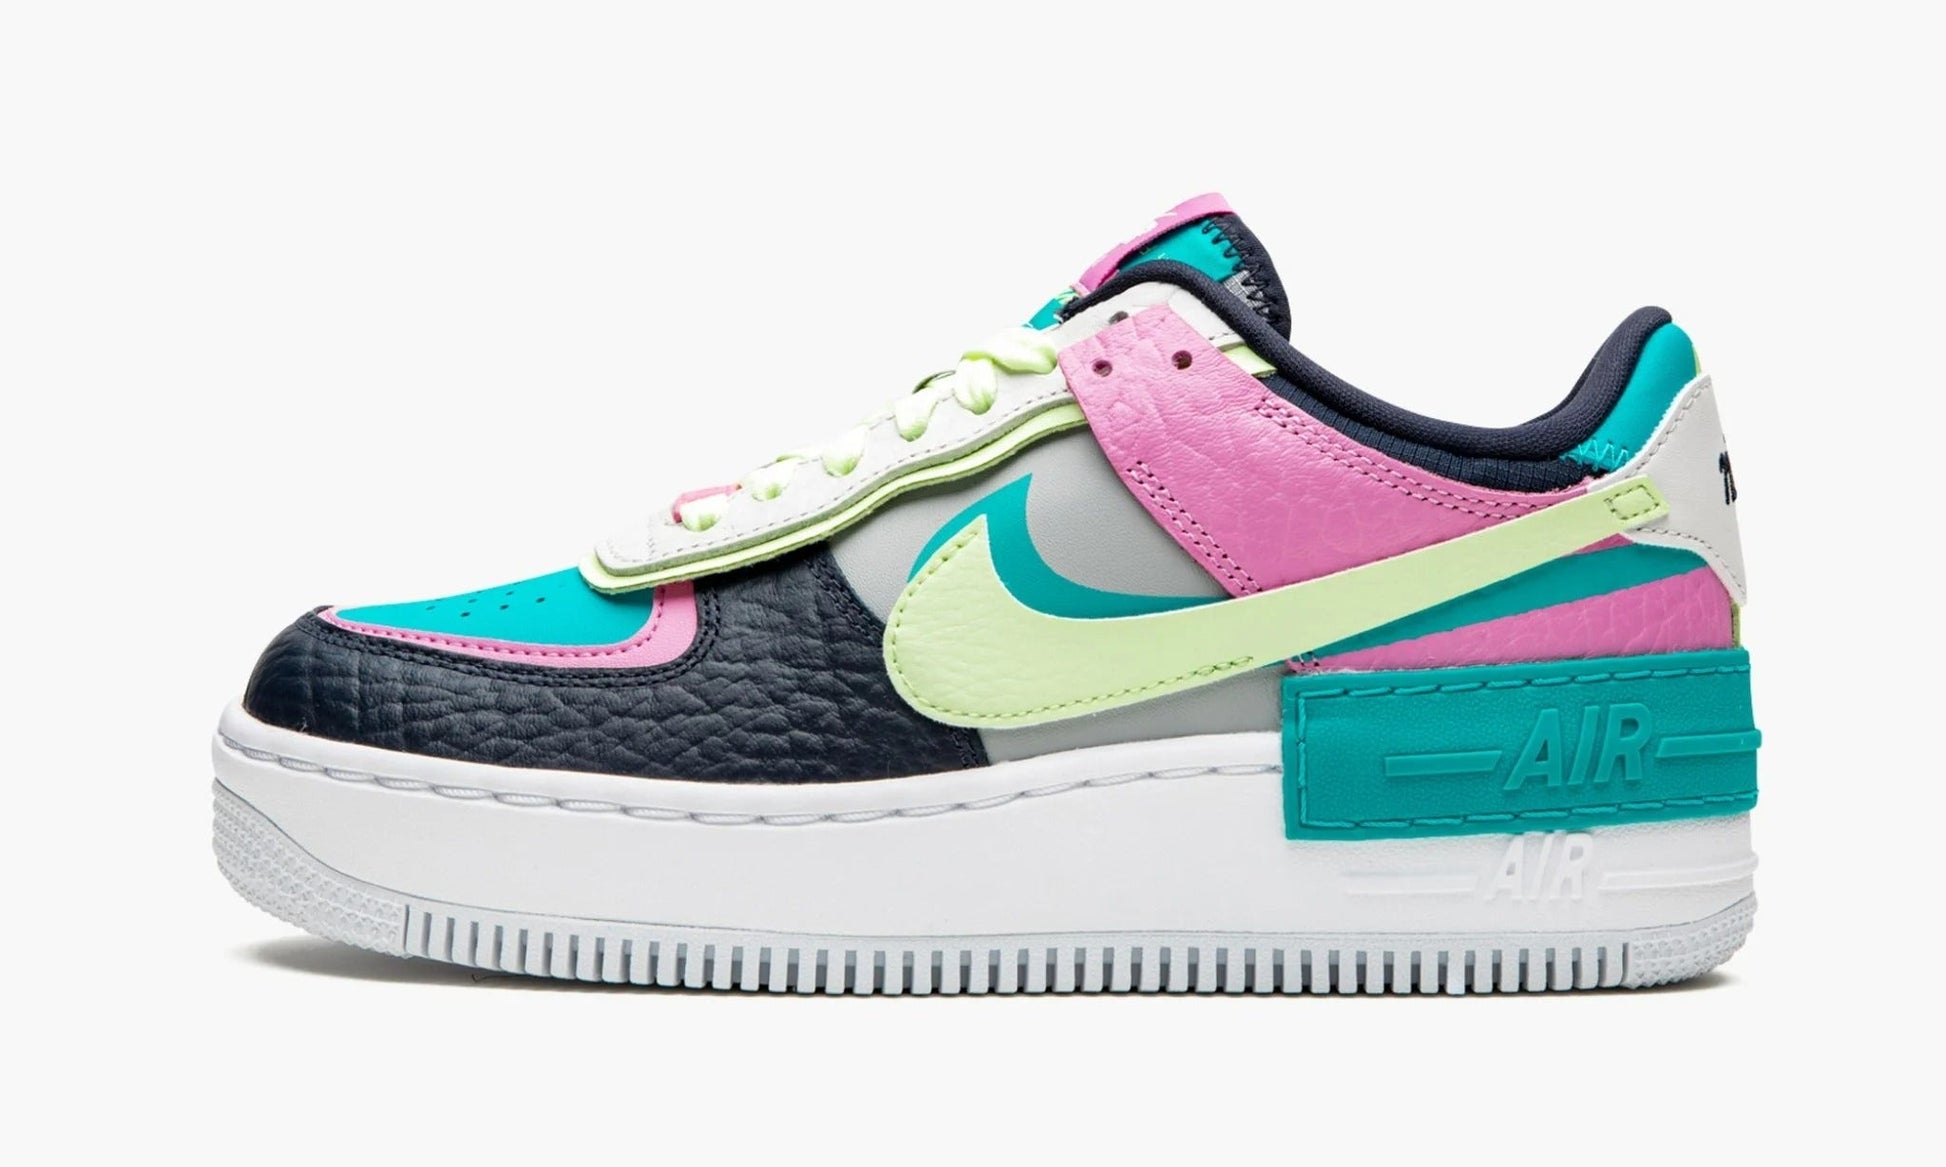 Air Force 1 Low Shadow Barely Volt Oracle Aqua - CK3172 001 